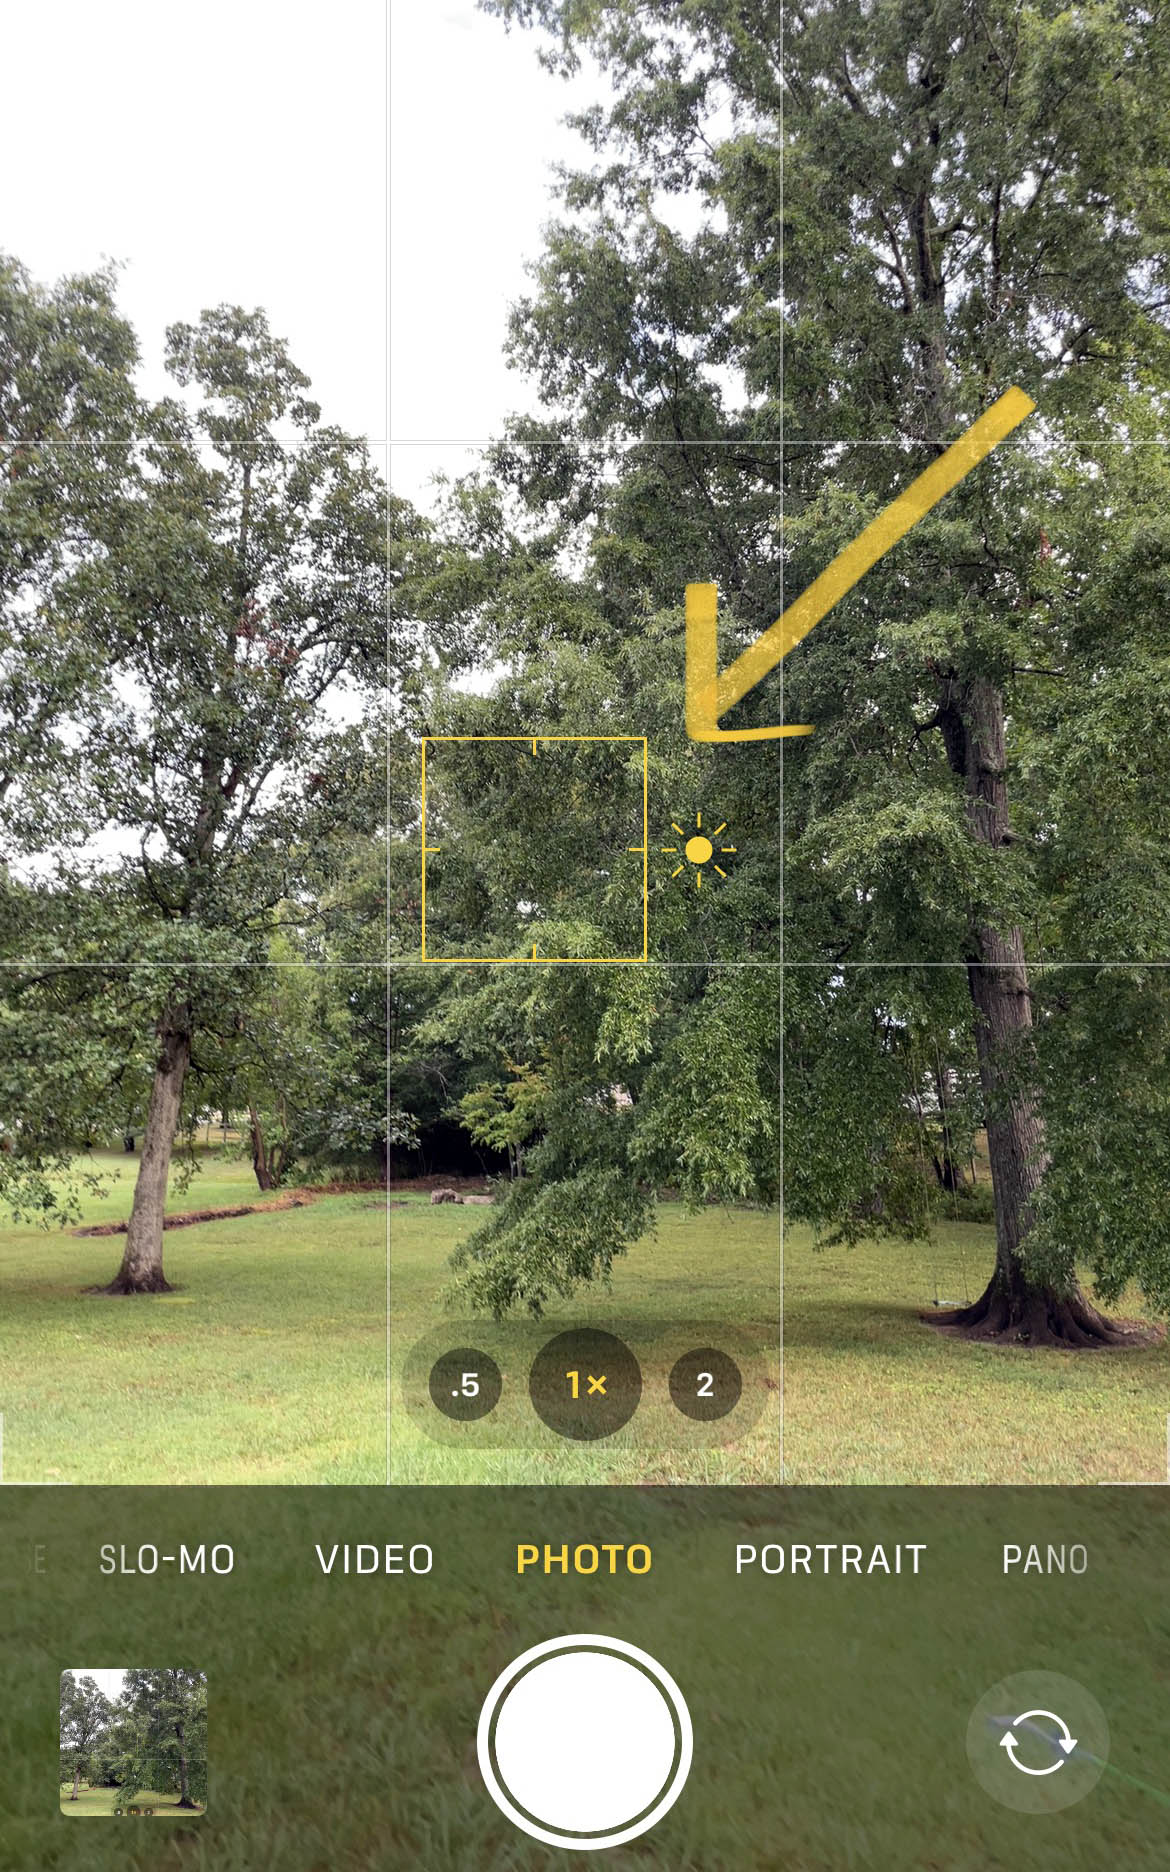 How to take better photos with your iPhone